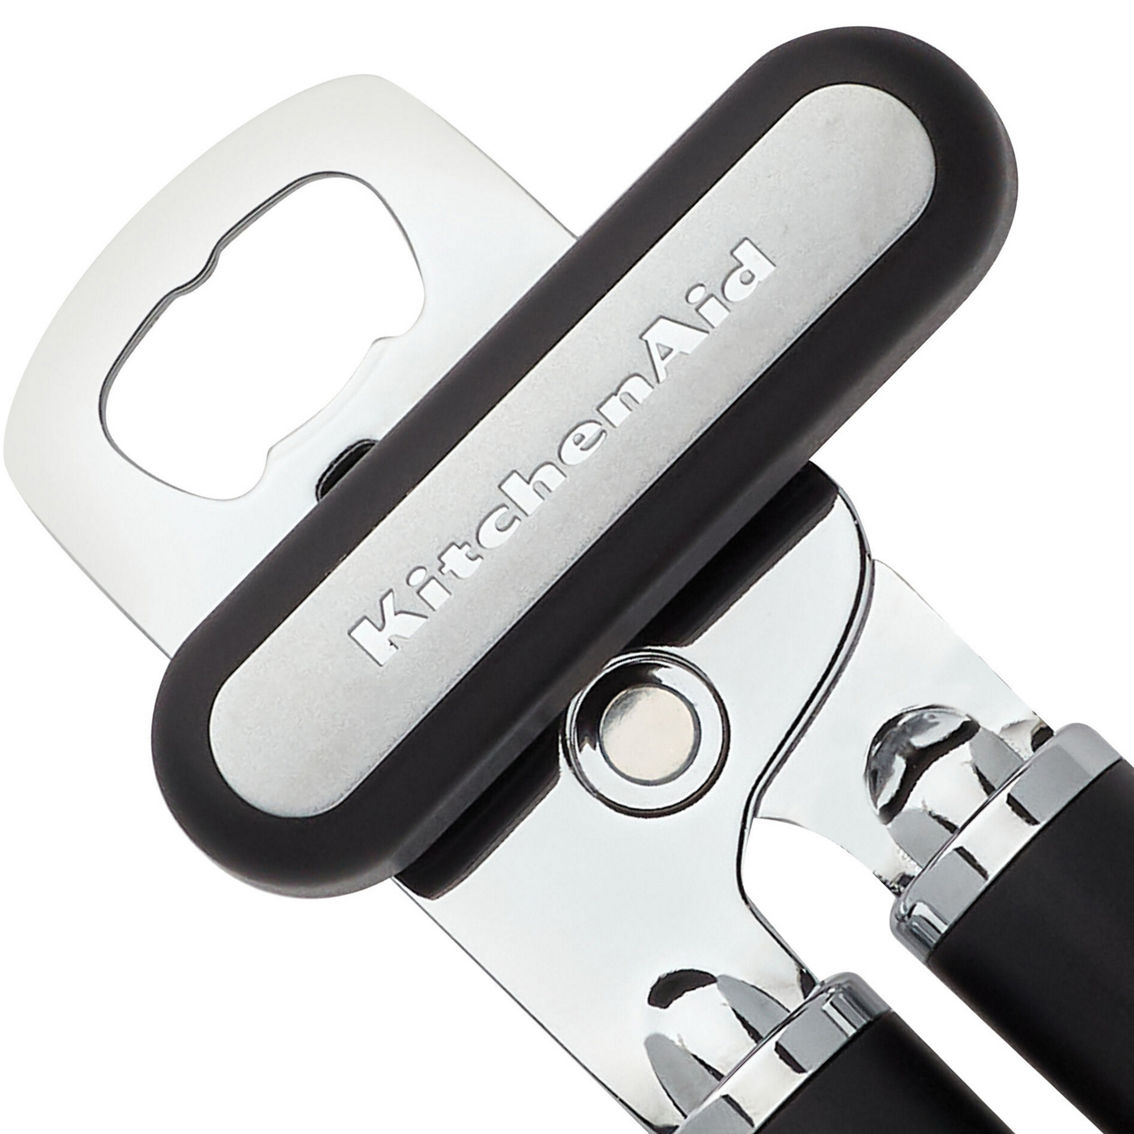 KitchenAid Gourmet Multi Function Can Opener with Bottle Opener - Image 3 of 6